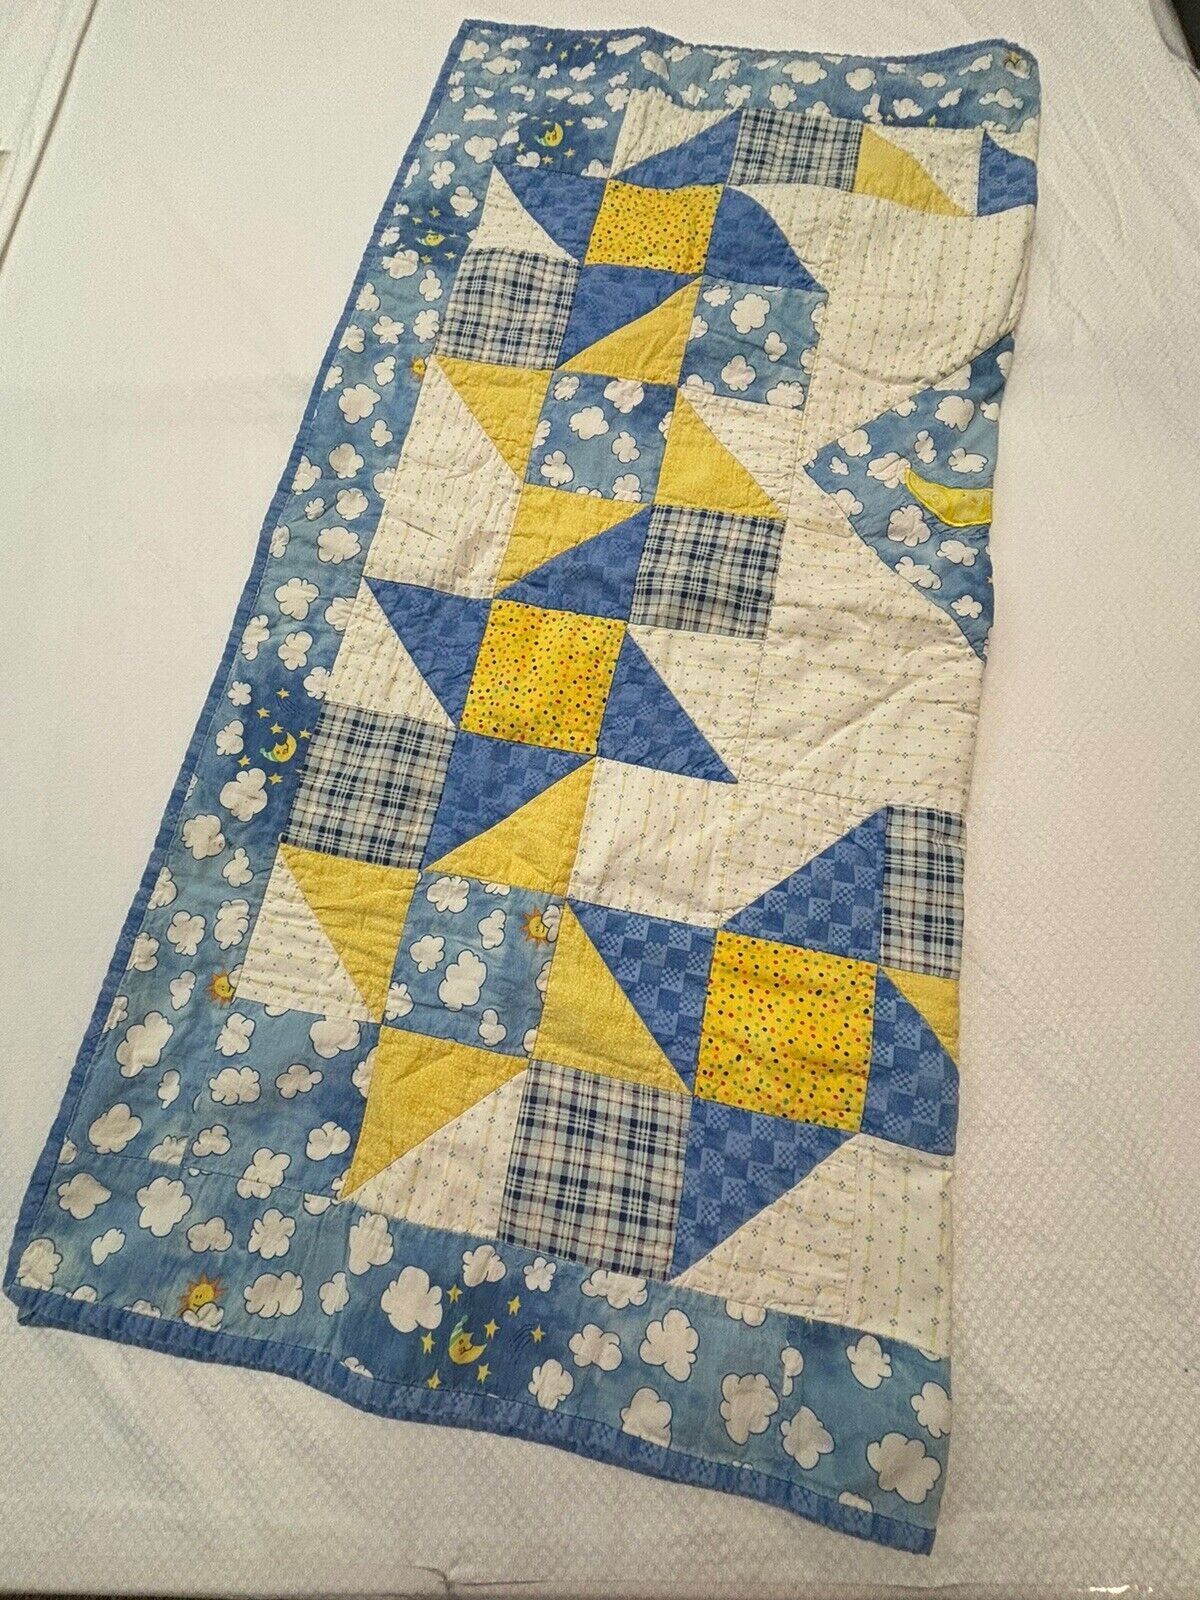 Vintage Quilt For Baby Homemade Bear Print With Yellow/Blue/White Machine Stitch